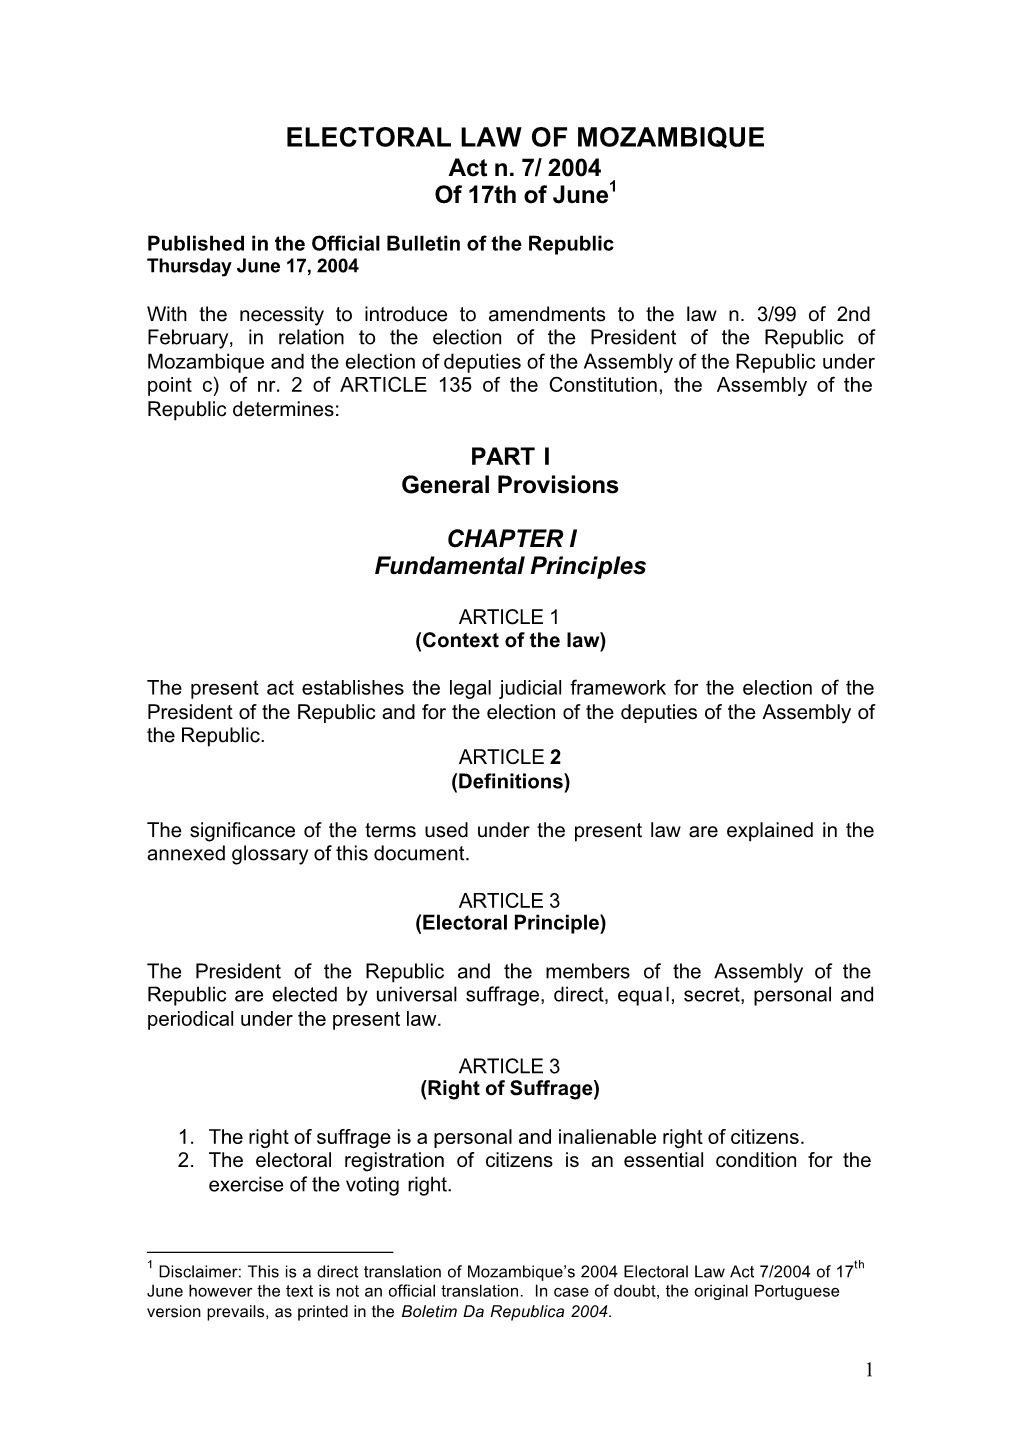 Electoral Law 7 2004 of 17 of June 2004.Pdf